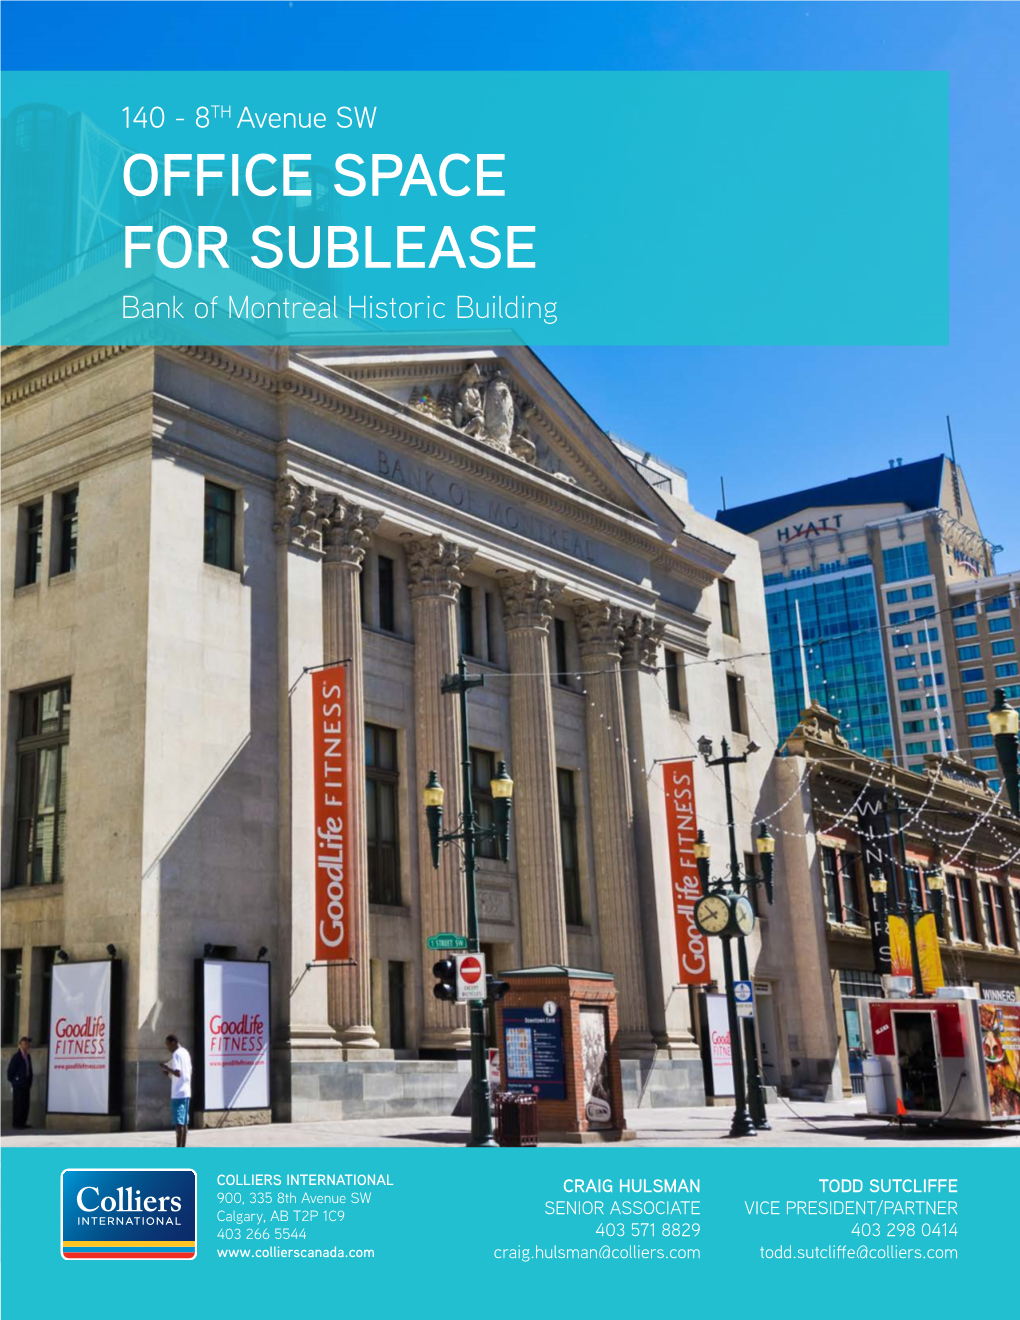 OFFICE SPACE for SUBLEASE Bank of Montreal Historic Building